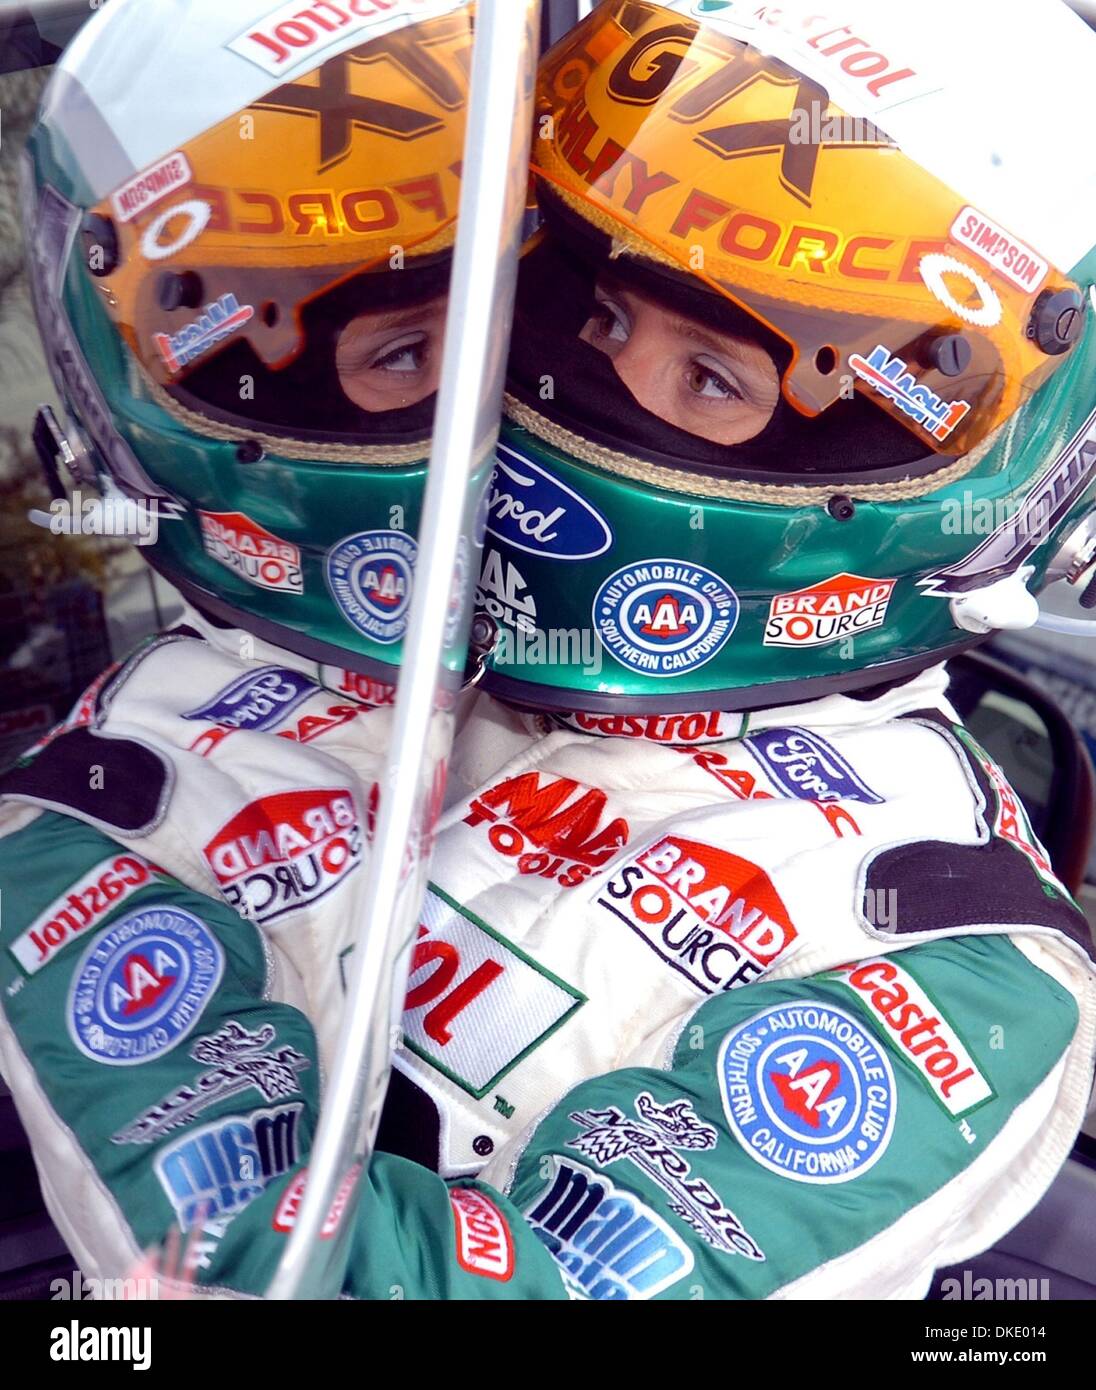 Feb 08, 2007 - Pomona, California, USA - ASHLEY FORCE, 24 from Anaheim Hills, puts her helmet on as she gets ready for her first professional run in funny car Thursday February 8, 2007 at the 47th annual CARQUEST Auto Parts NHRA Winternationals at Fairplex in Pomona.  (Credit Image: Â© Will Lester/ZUMA Press) Stock Photo